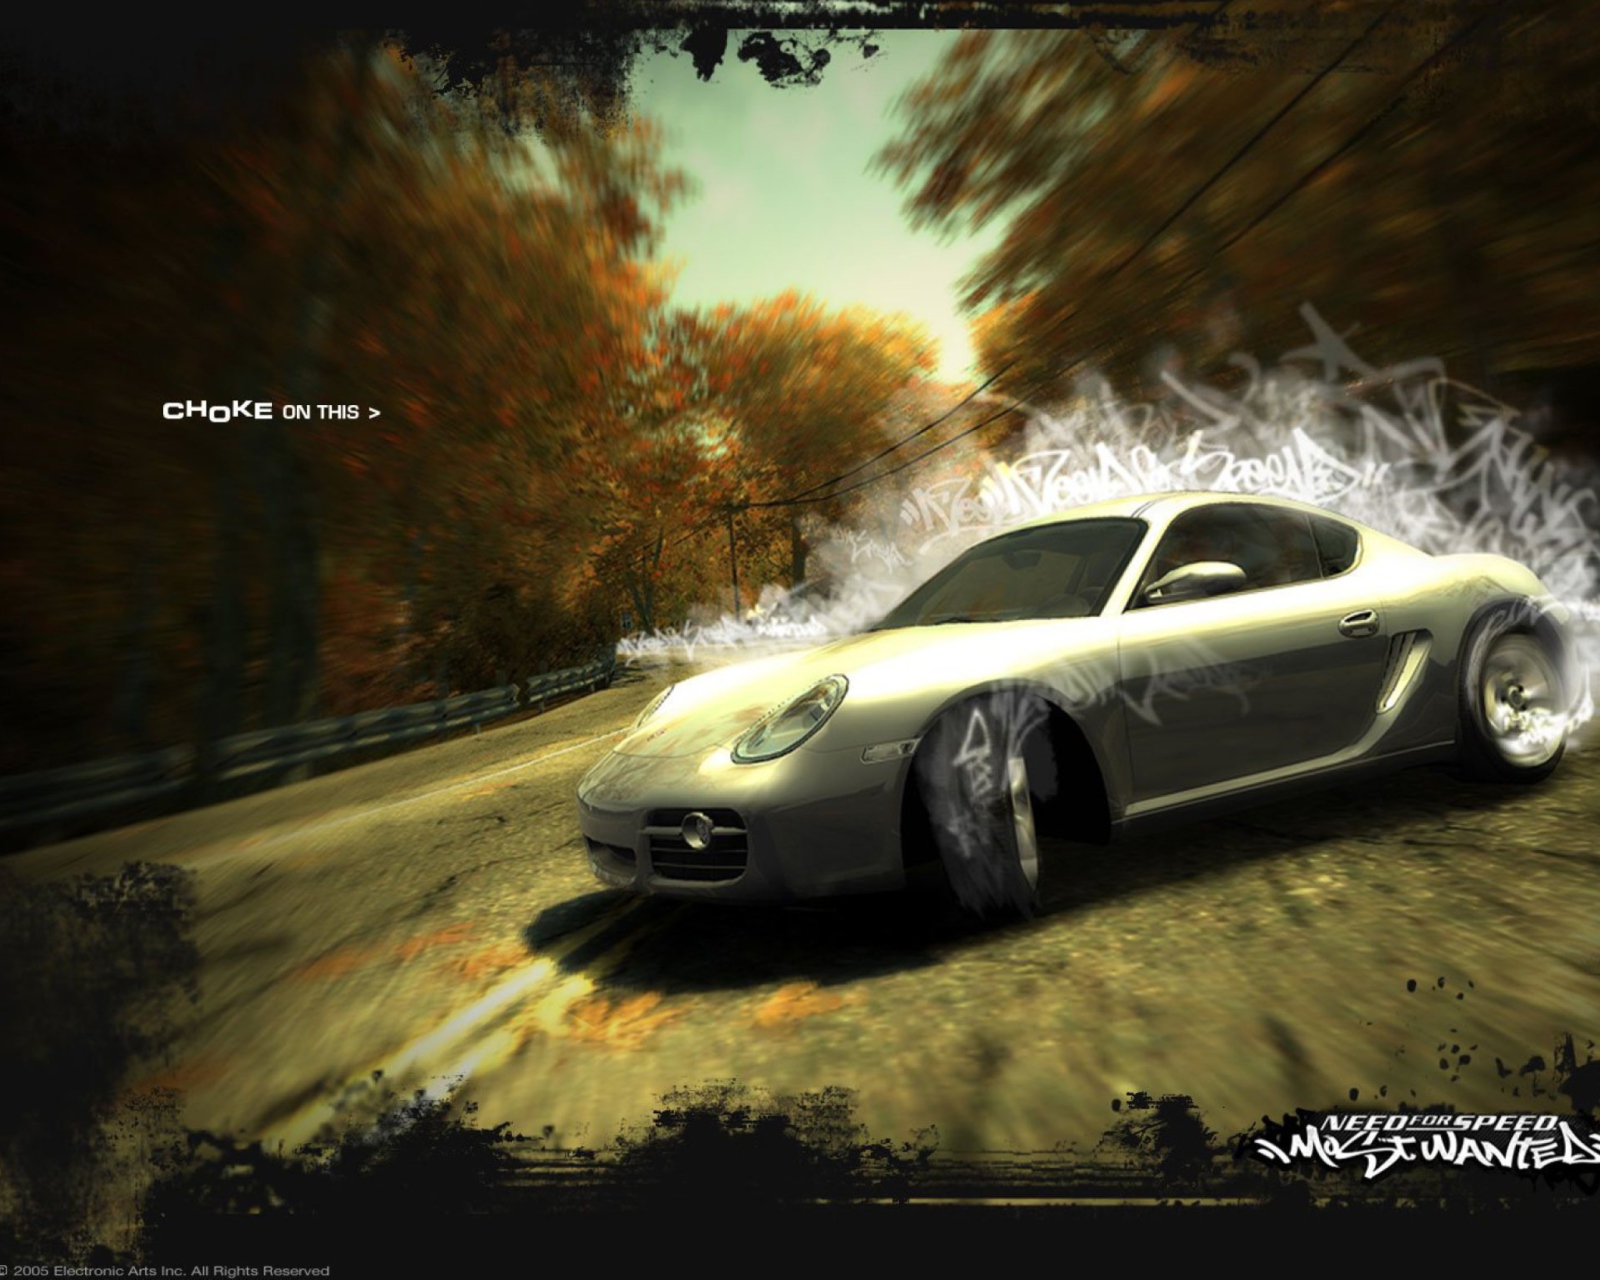 Need For Speed Most Wanted screenshot #1 1600x1280